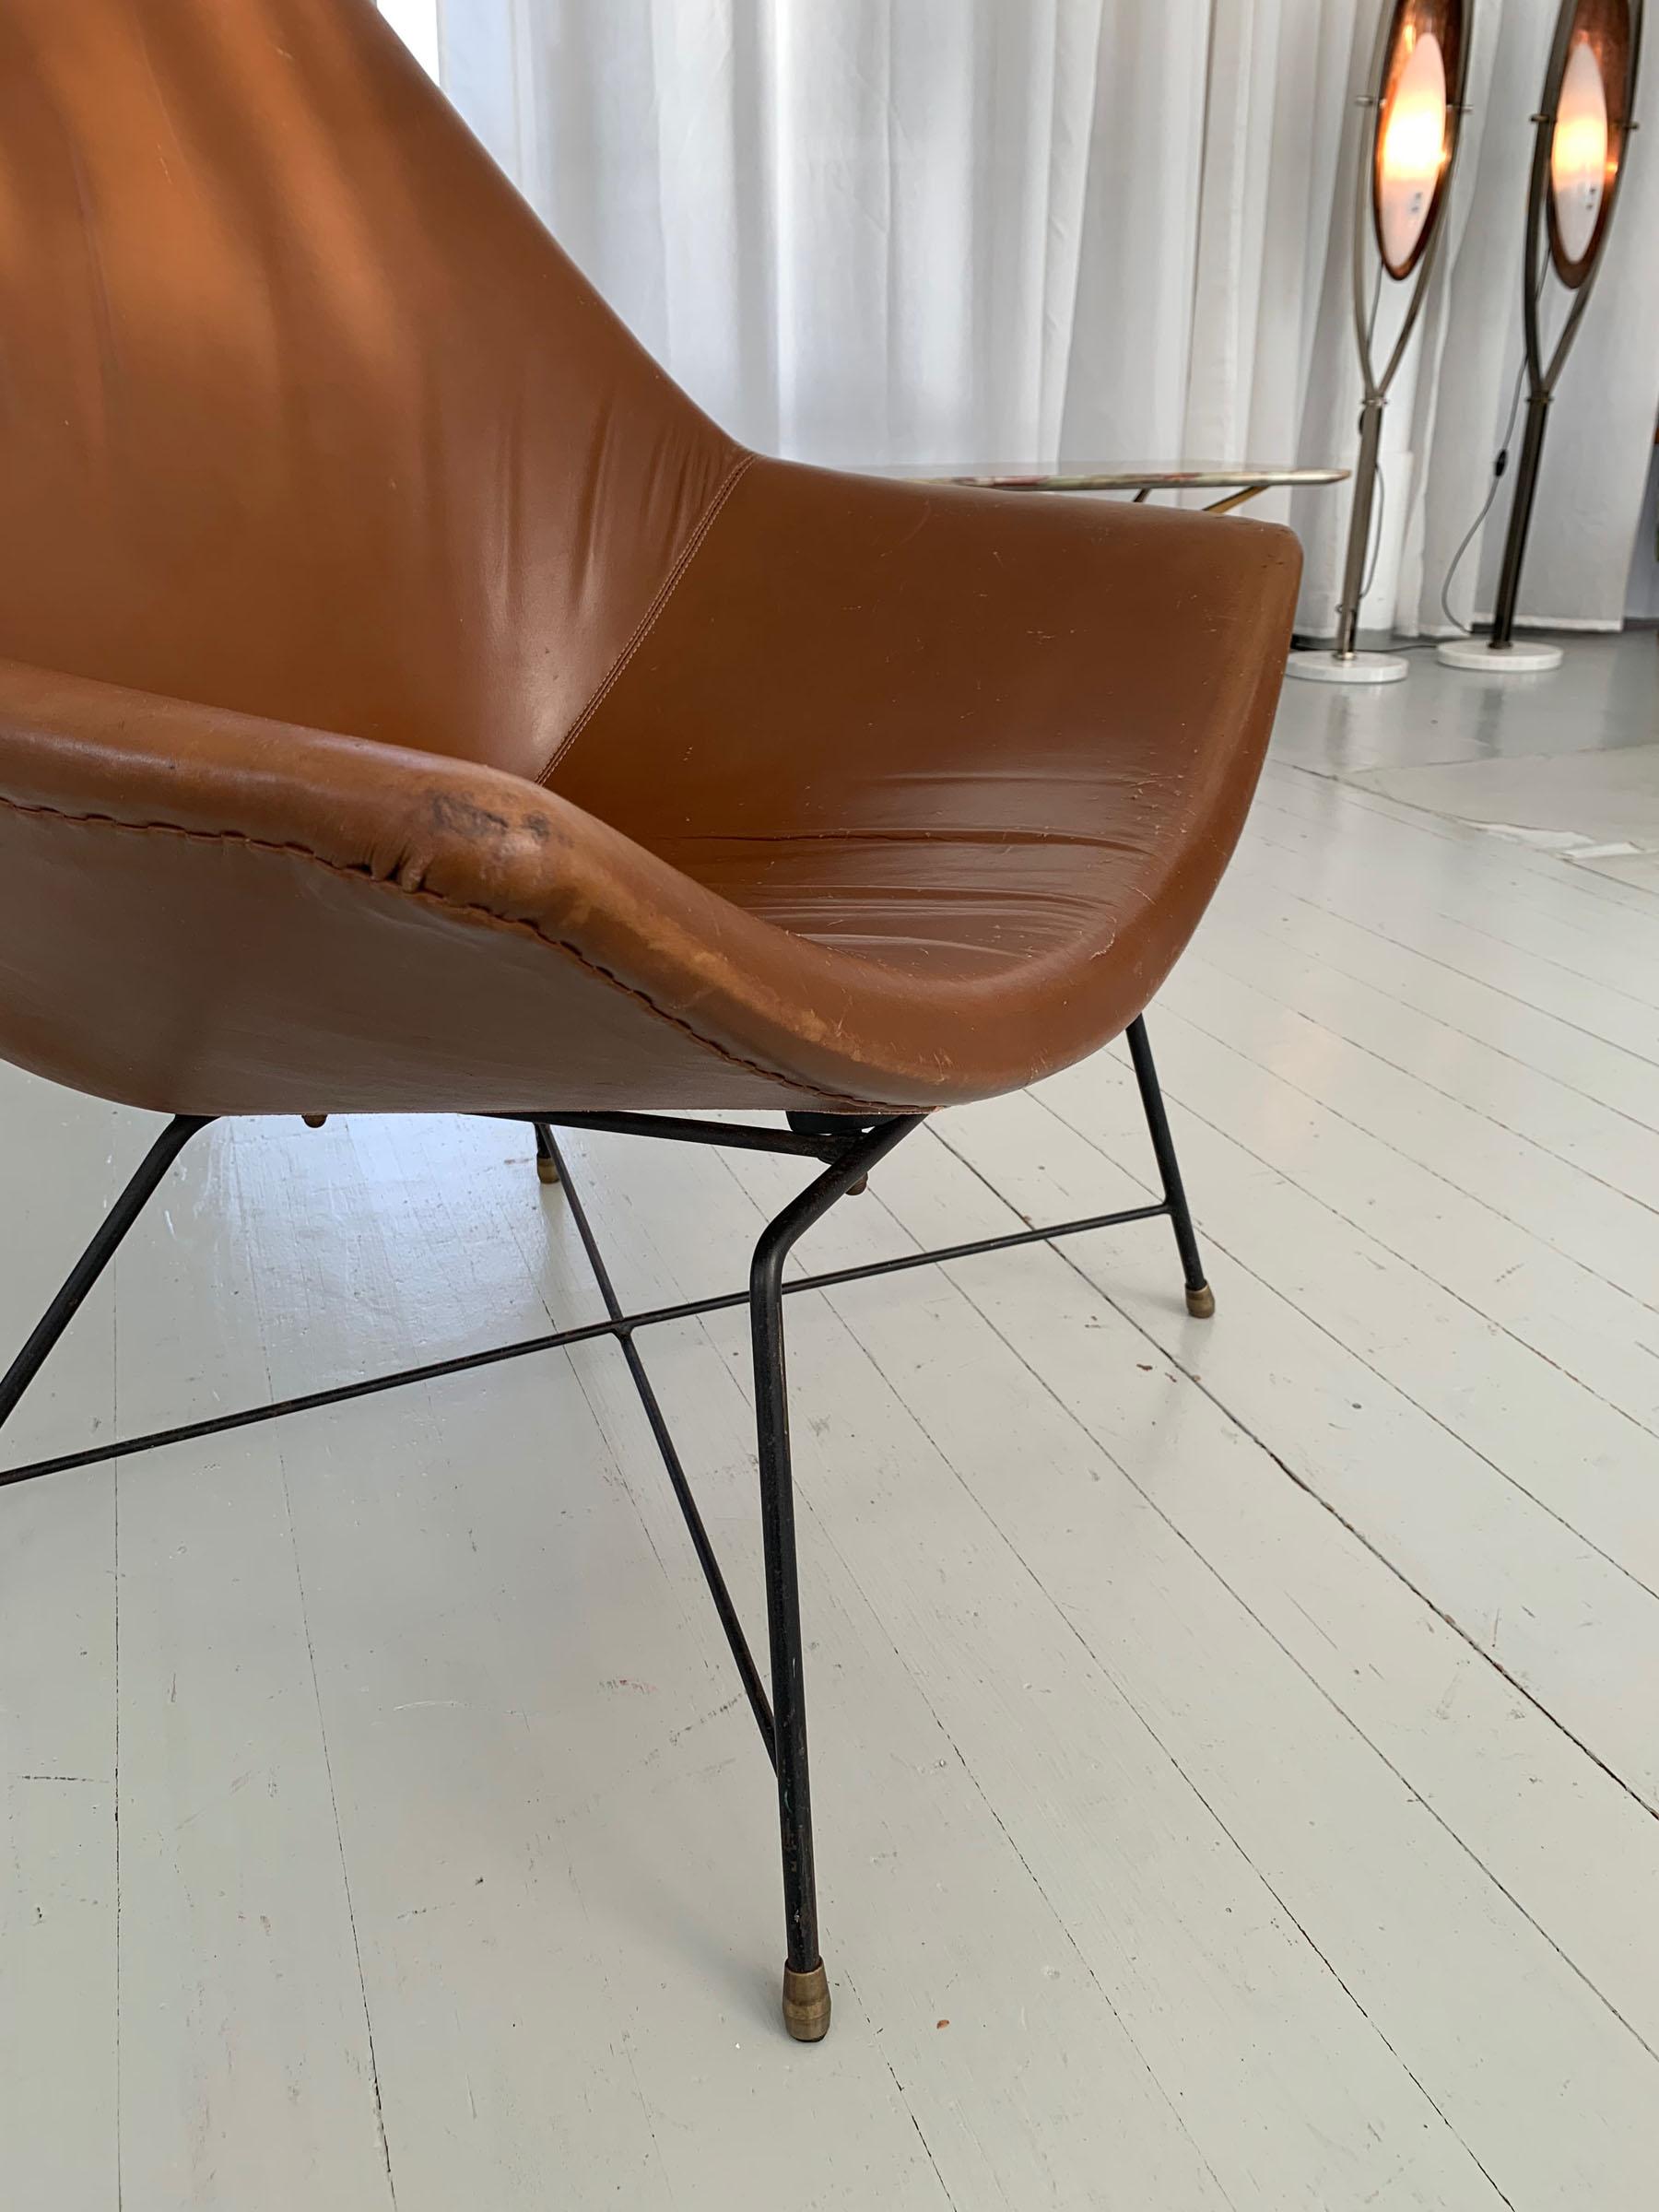 Italian Brown Leather Kosmos Chair Design by Augusto Bozzi for Saporiti, 1954 For Sale 7